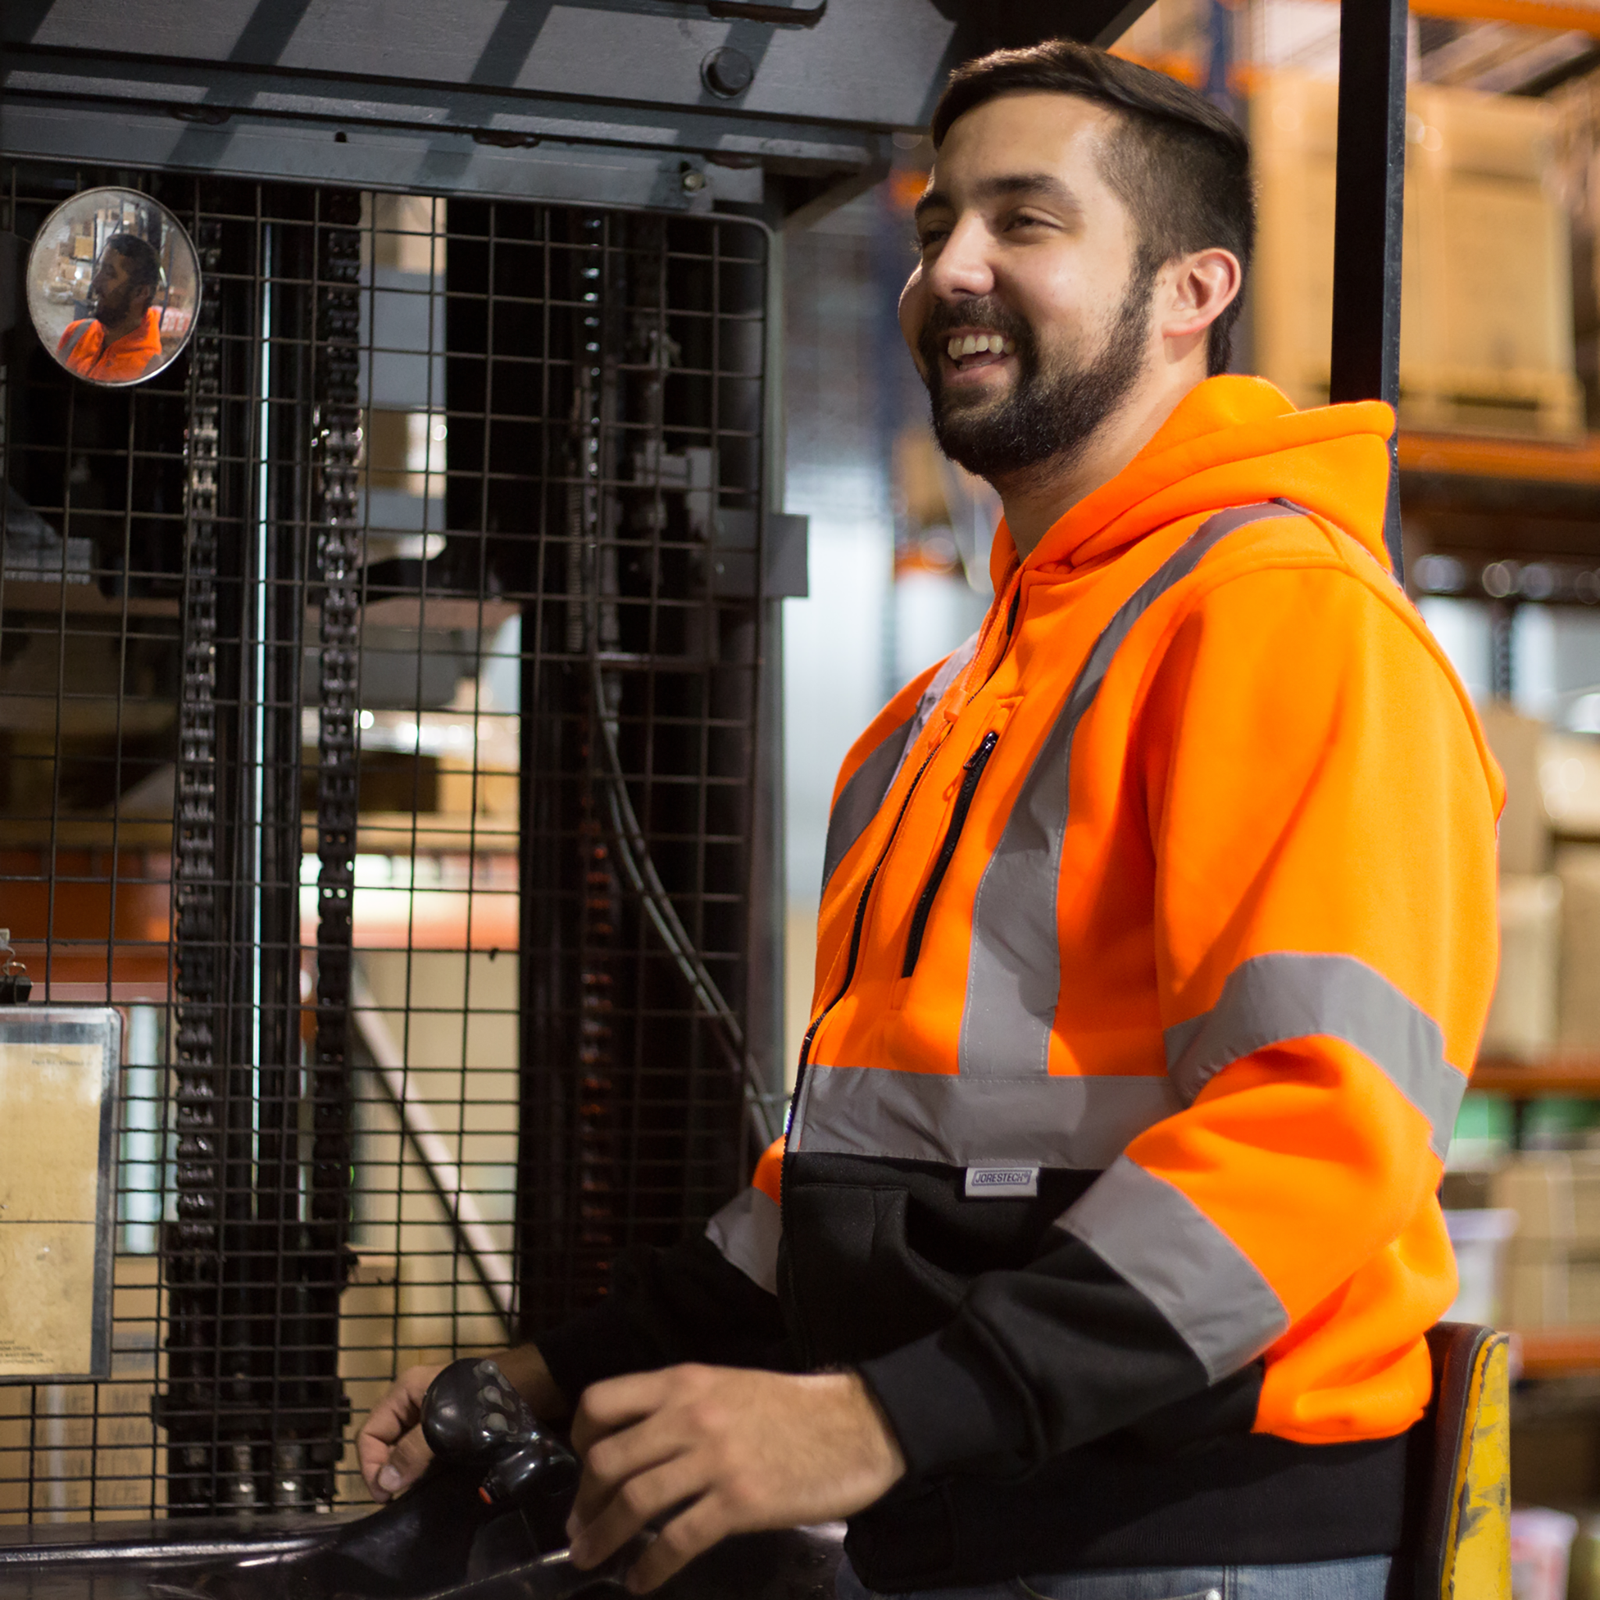 Worker wearing an orange JORESTECH safety sweatshirt with reflective stripes while he is driving a forklift